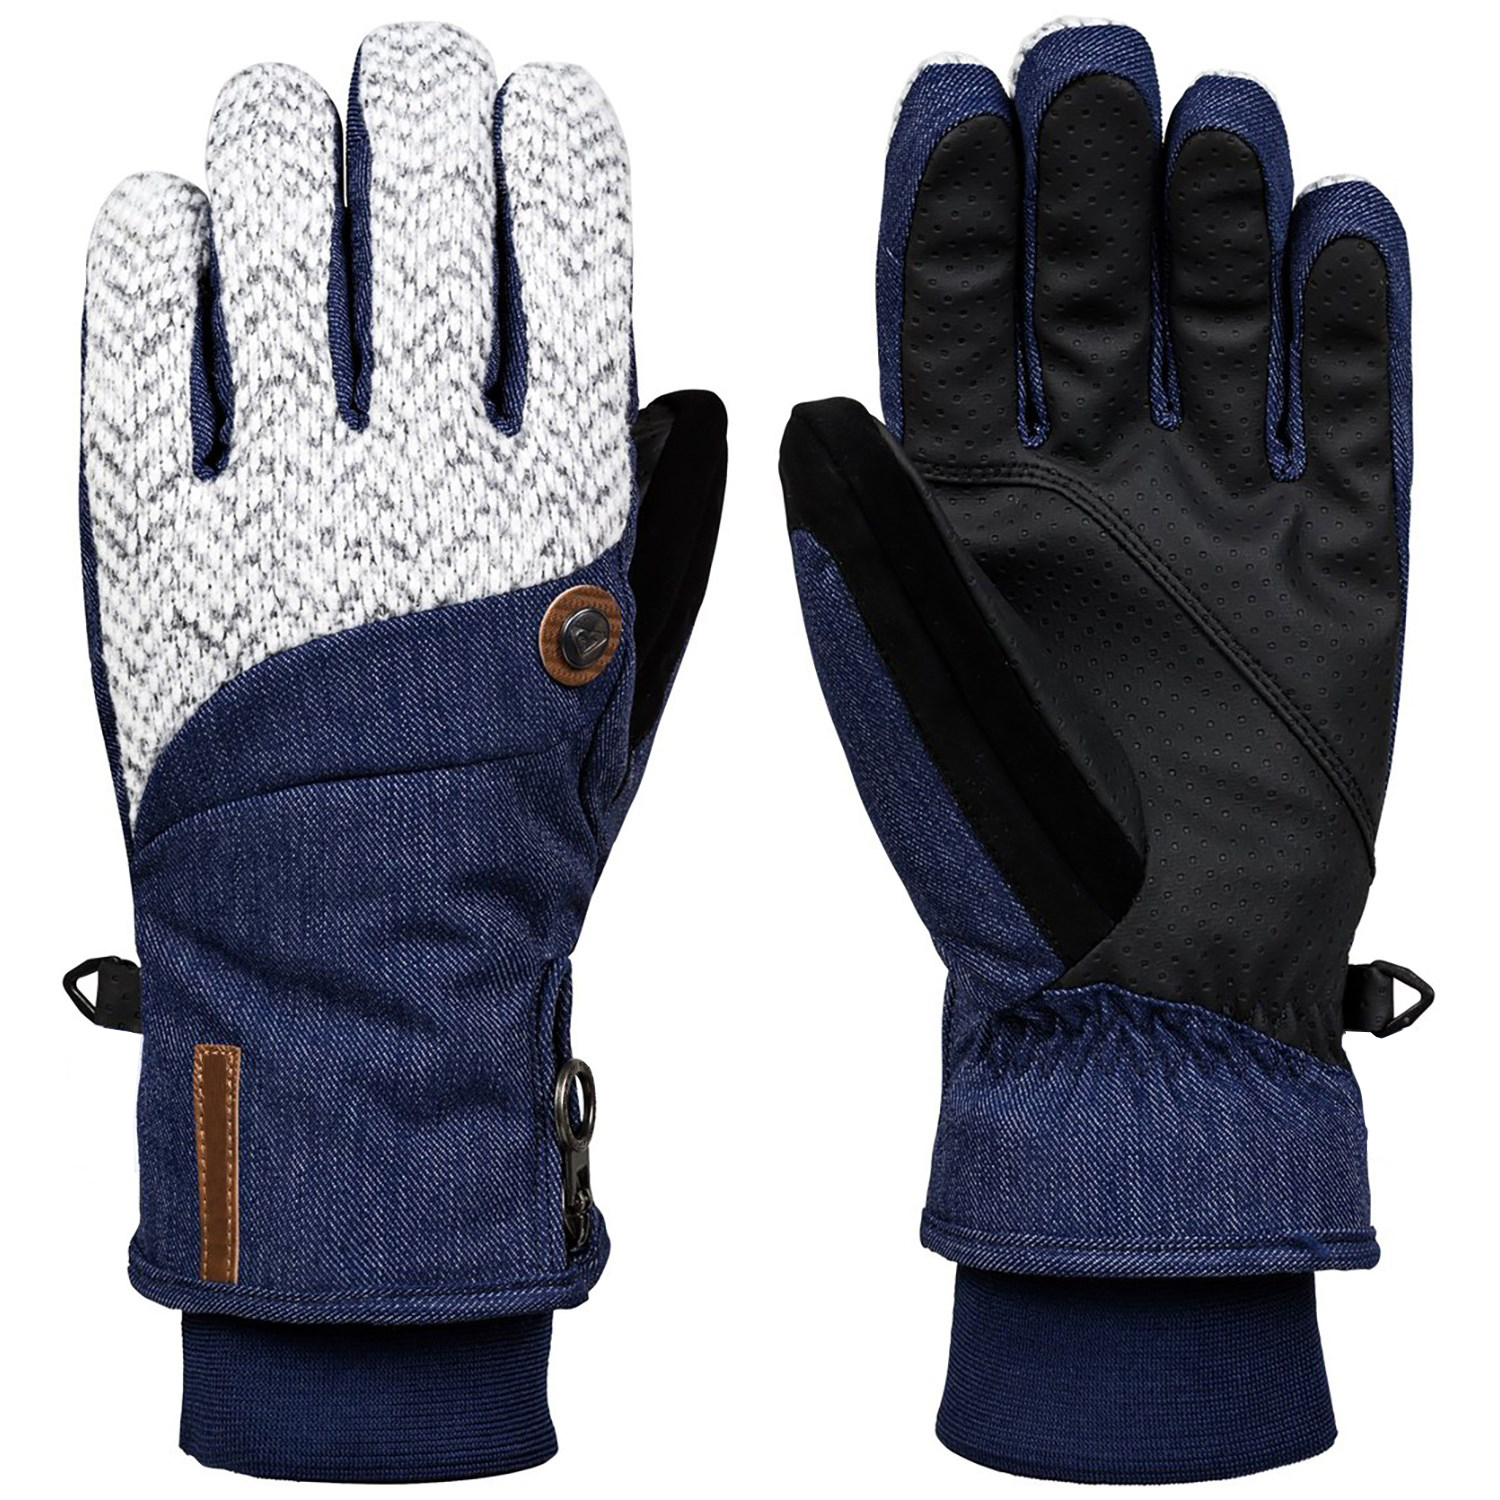 Young waterproof warm winter leather palm ski gloves